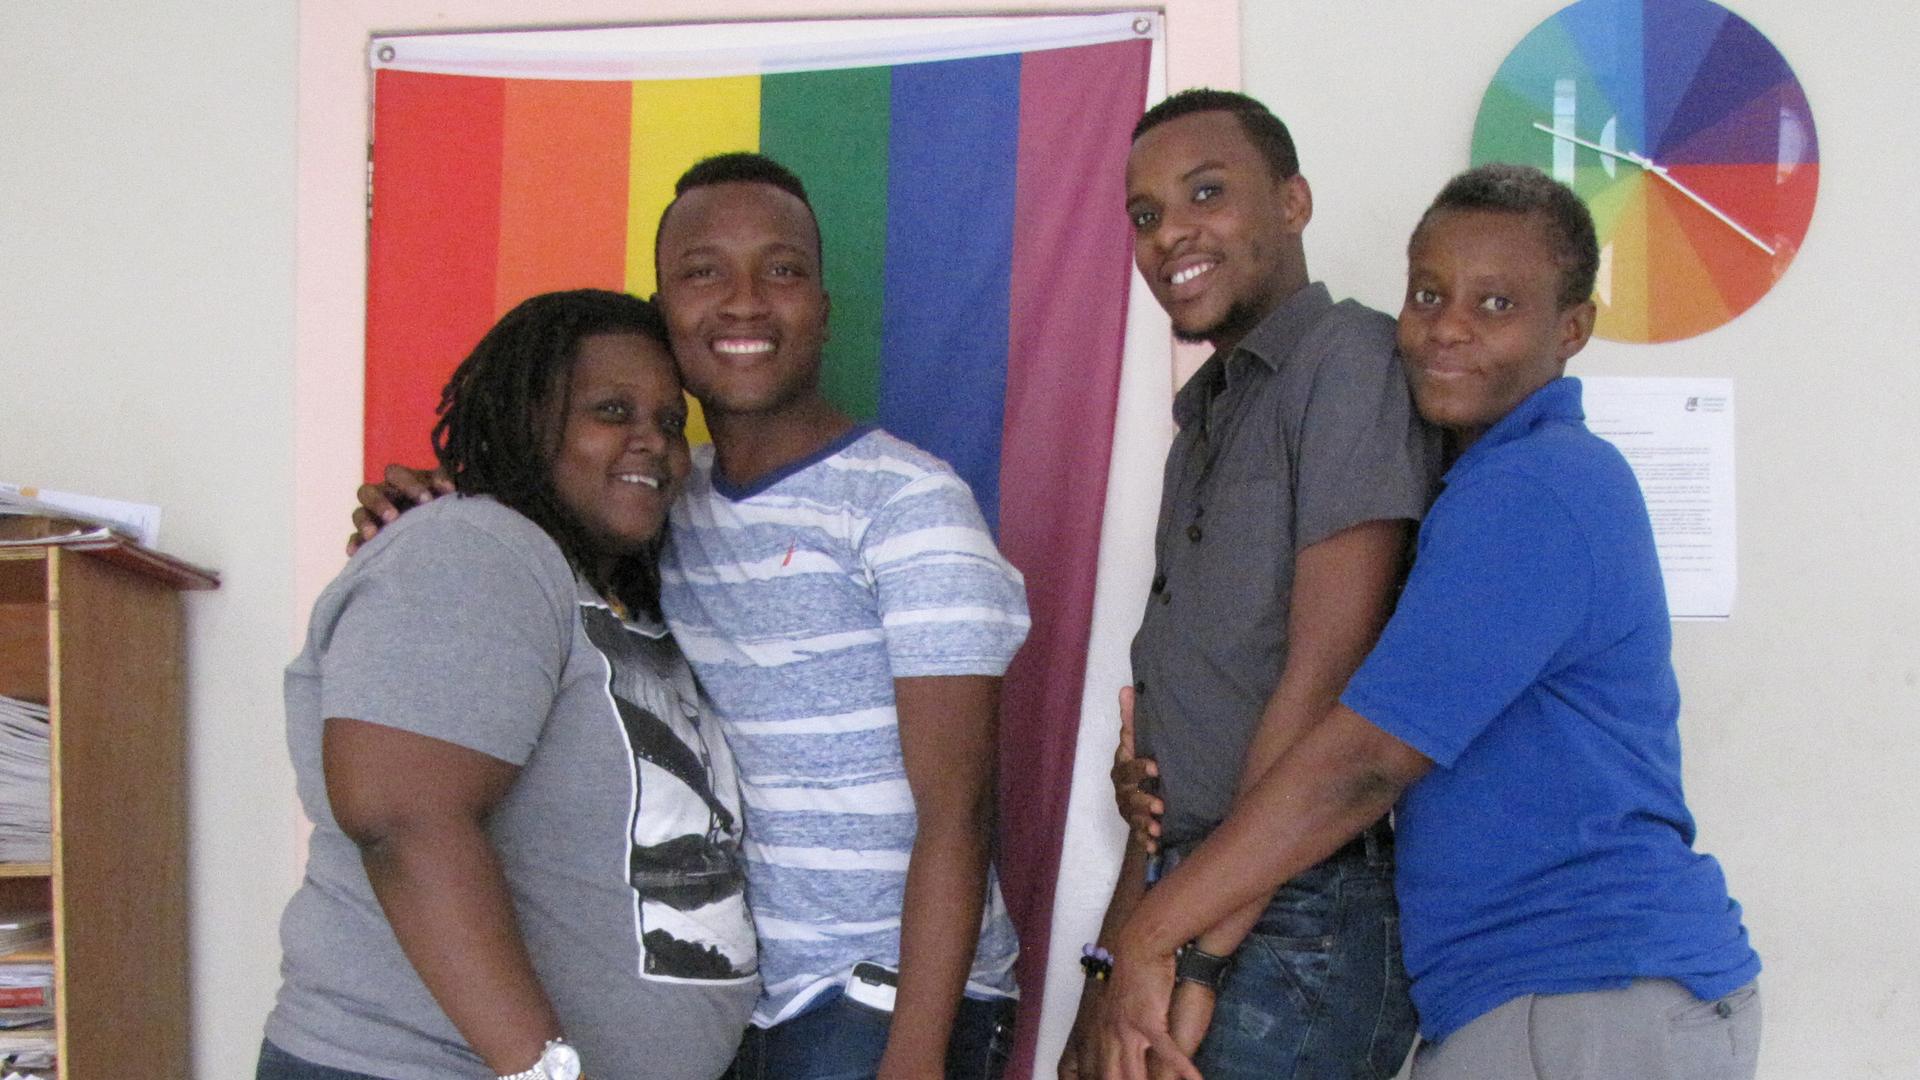 At the headquarters of Kouraj, a prominent LGBT rights group in Haiti. Outside, the office is unmarked.